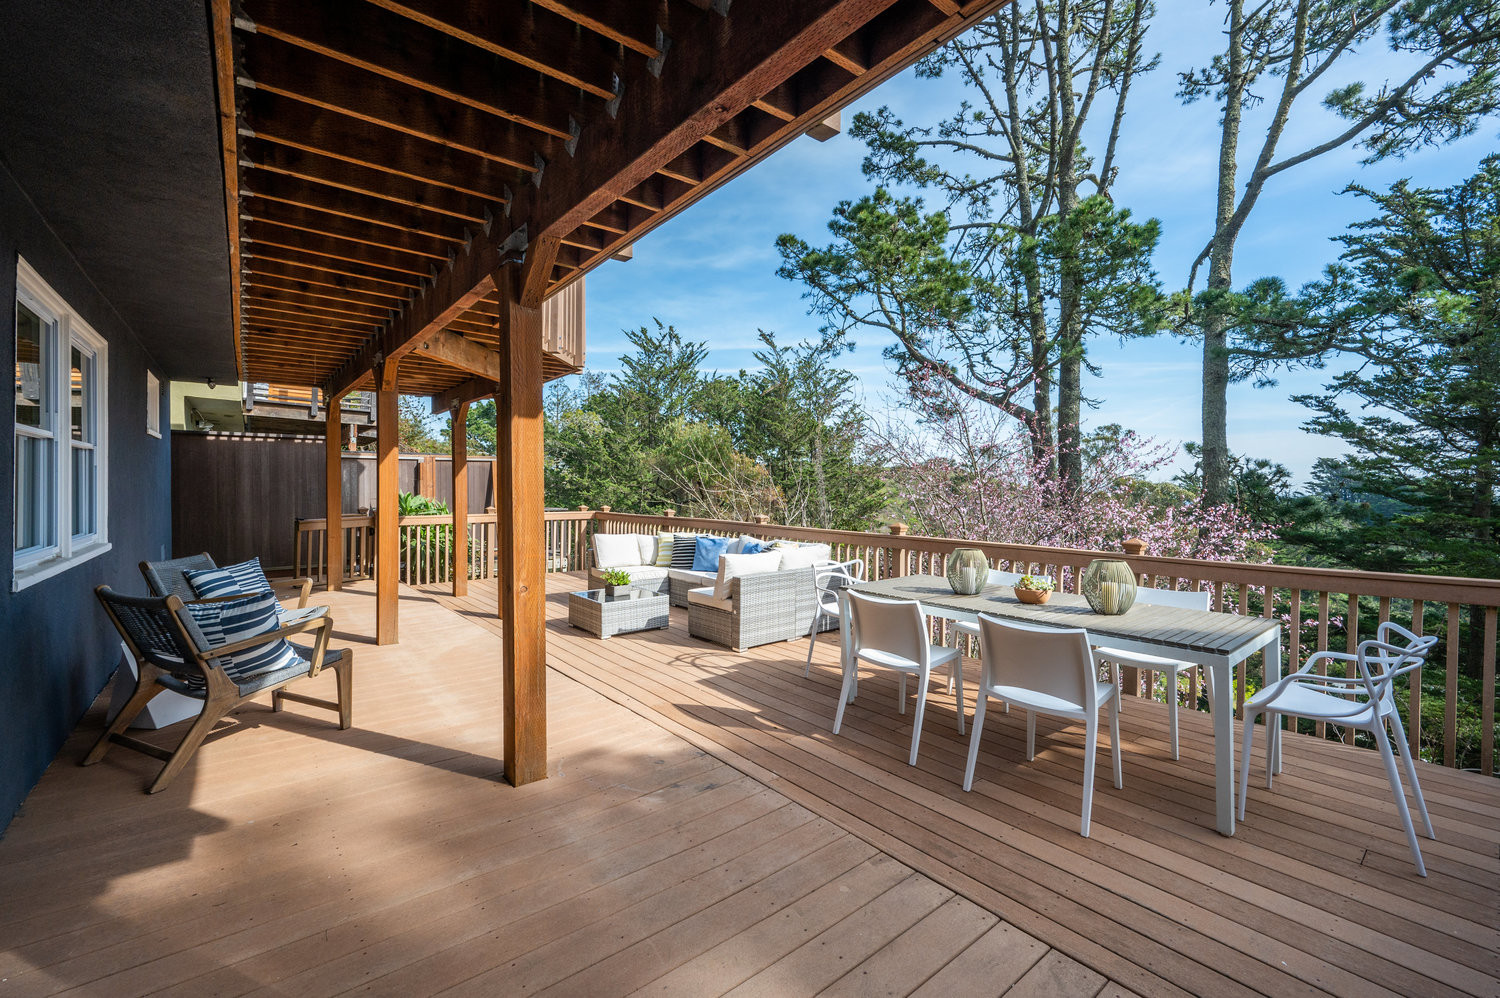 Property Photo: View of the lower deck, showing a large outdoor living and dining area